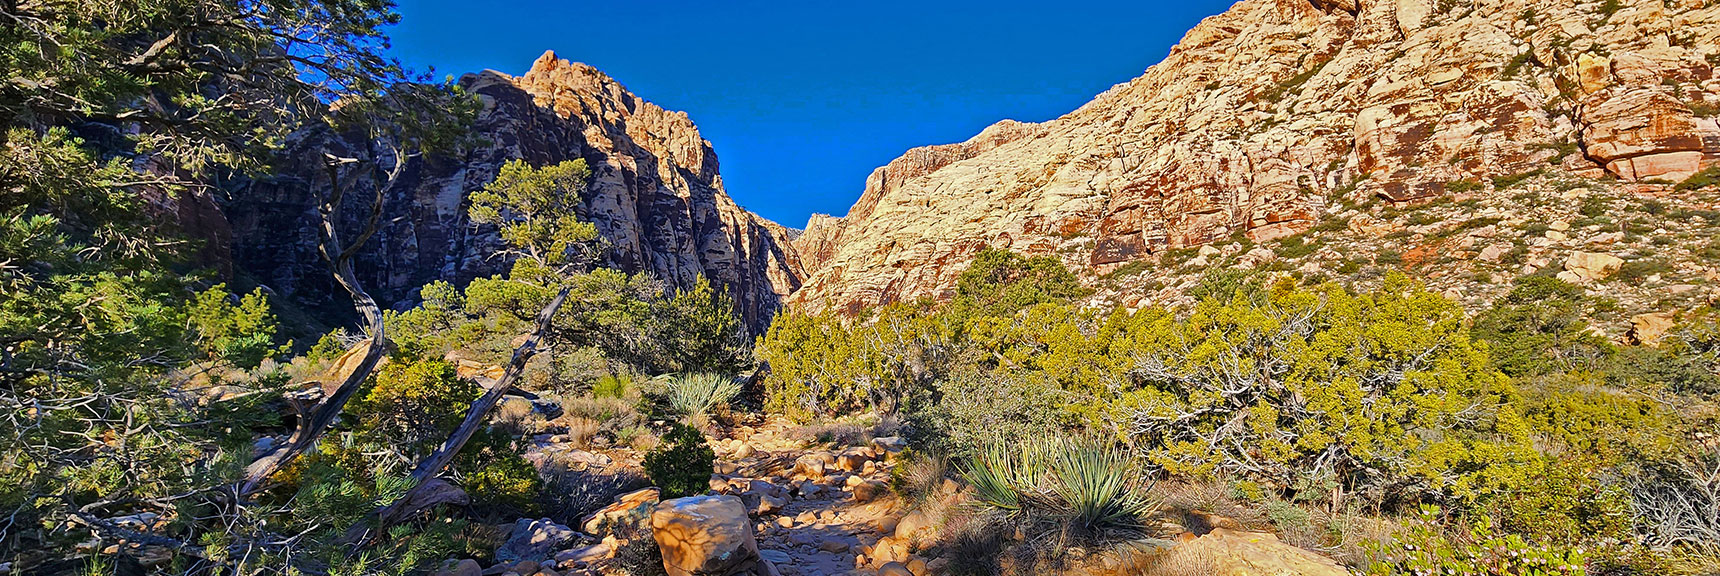 Forest Thickens, Bird Songs Increasing Closer to Canyon Opening | Ice Box Canyon | Red Rock Canyon NCA, Nevada | Las Vegas Area Trails | David Smith